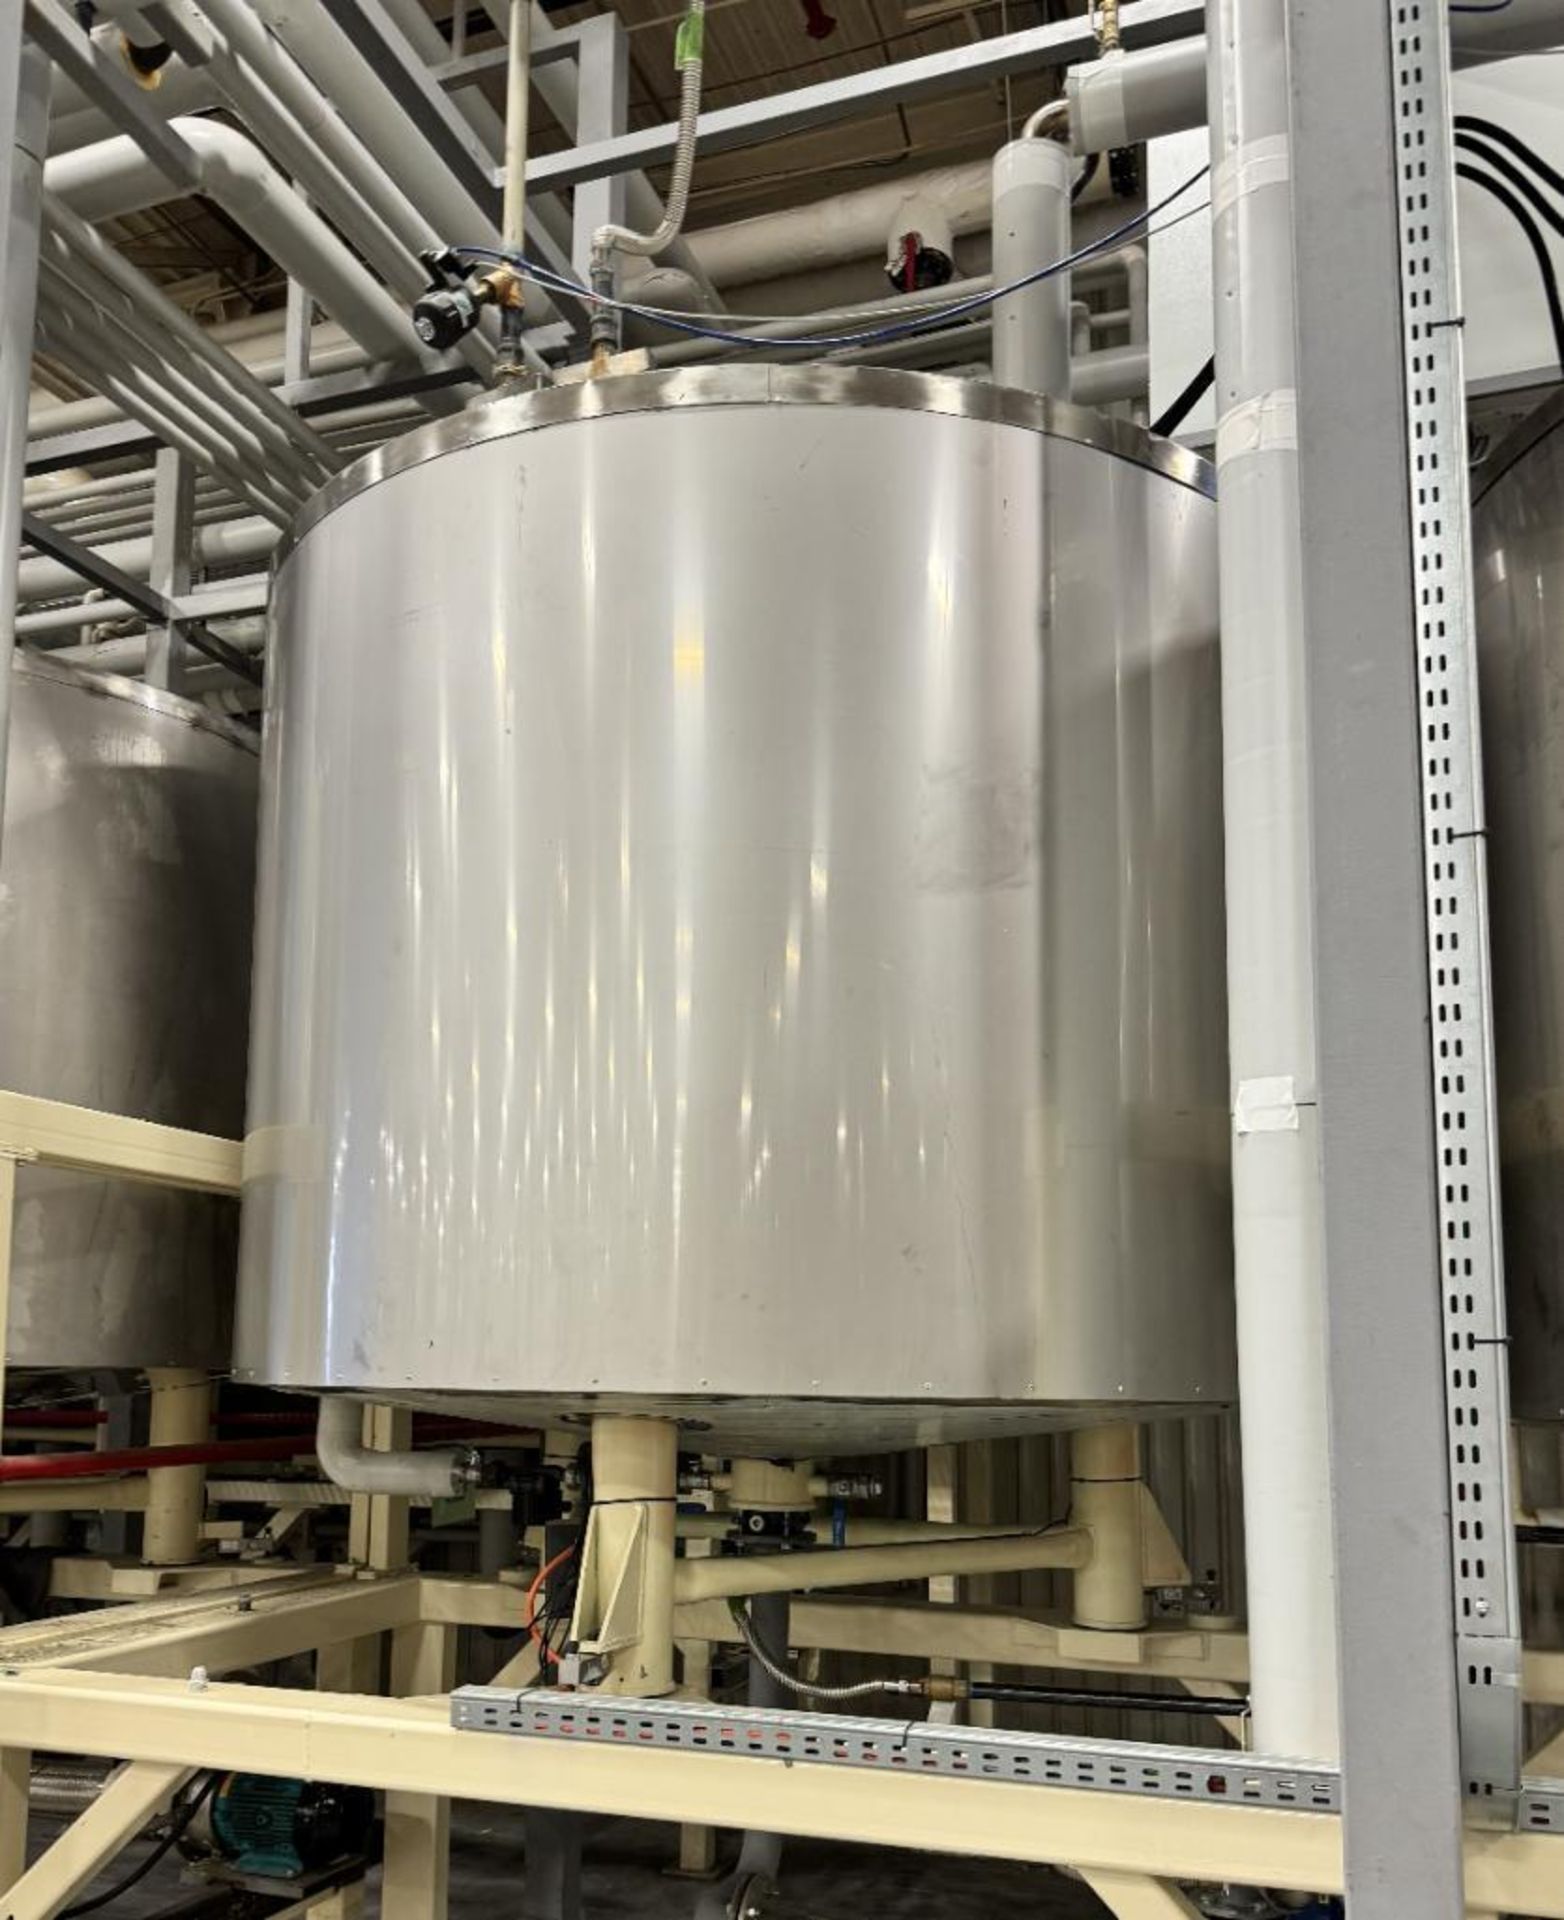 Luka Approximate 750 Gallon Stainless Steel Jacketed Mix Tank. Approximate 66" diameter x 50" straig